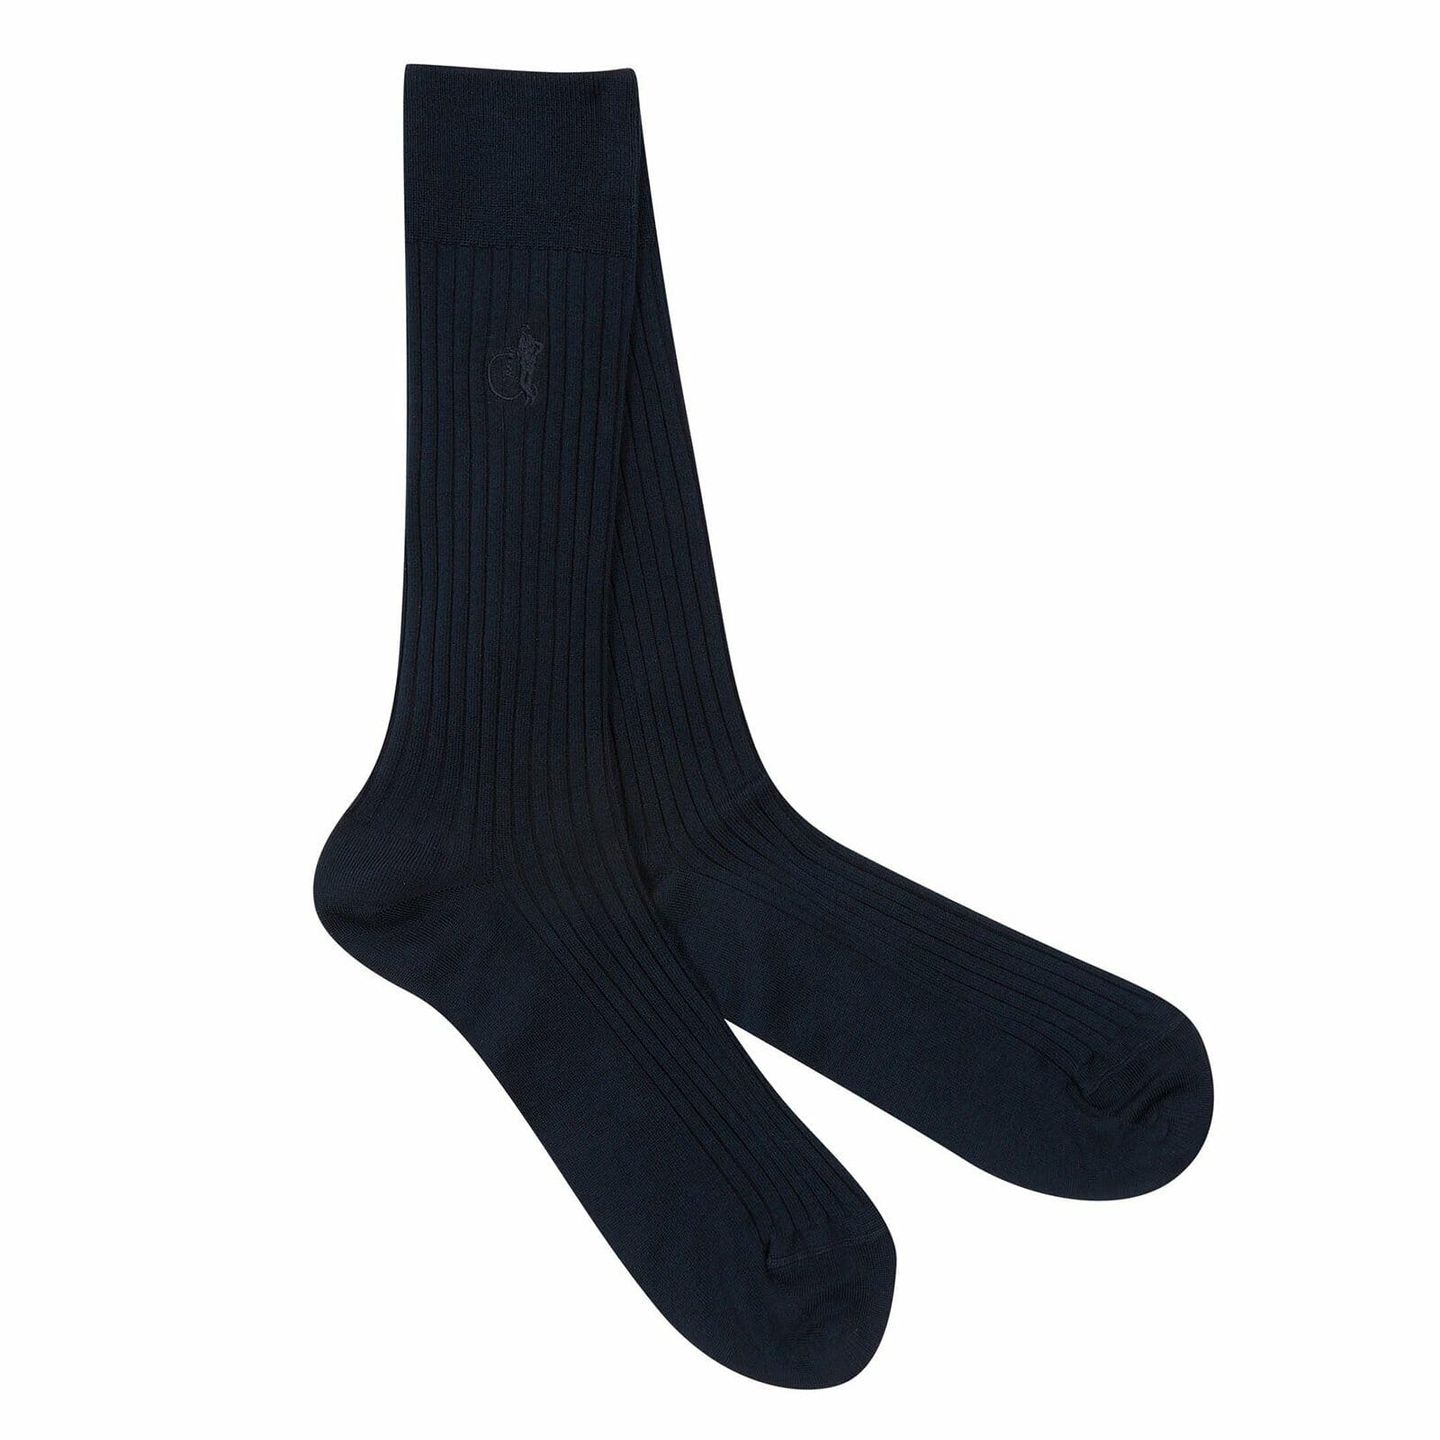 A pair of black sartorial socks with a white background